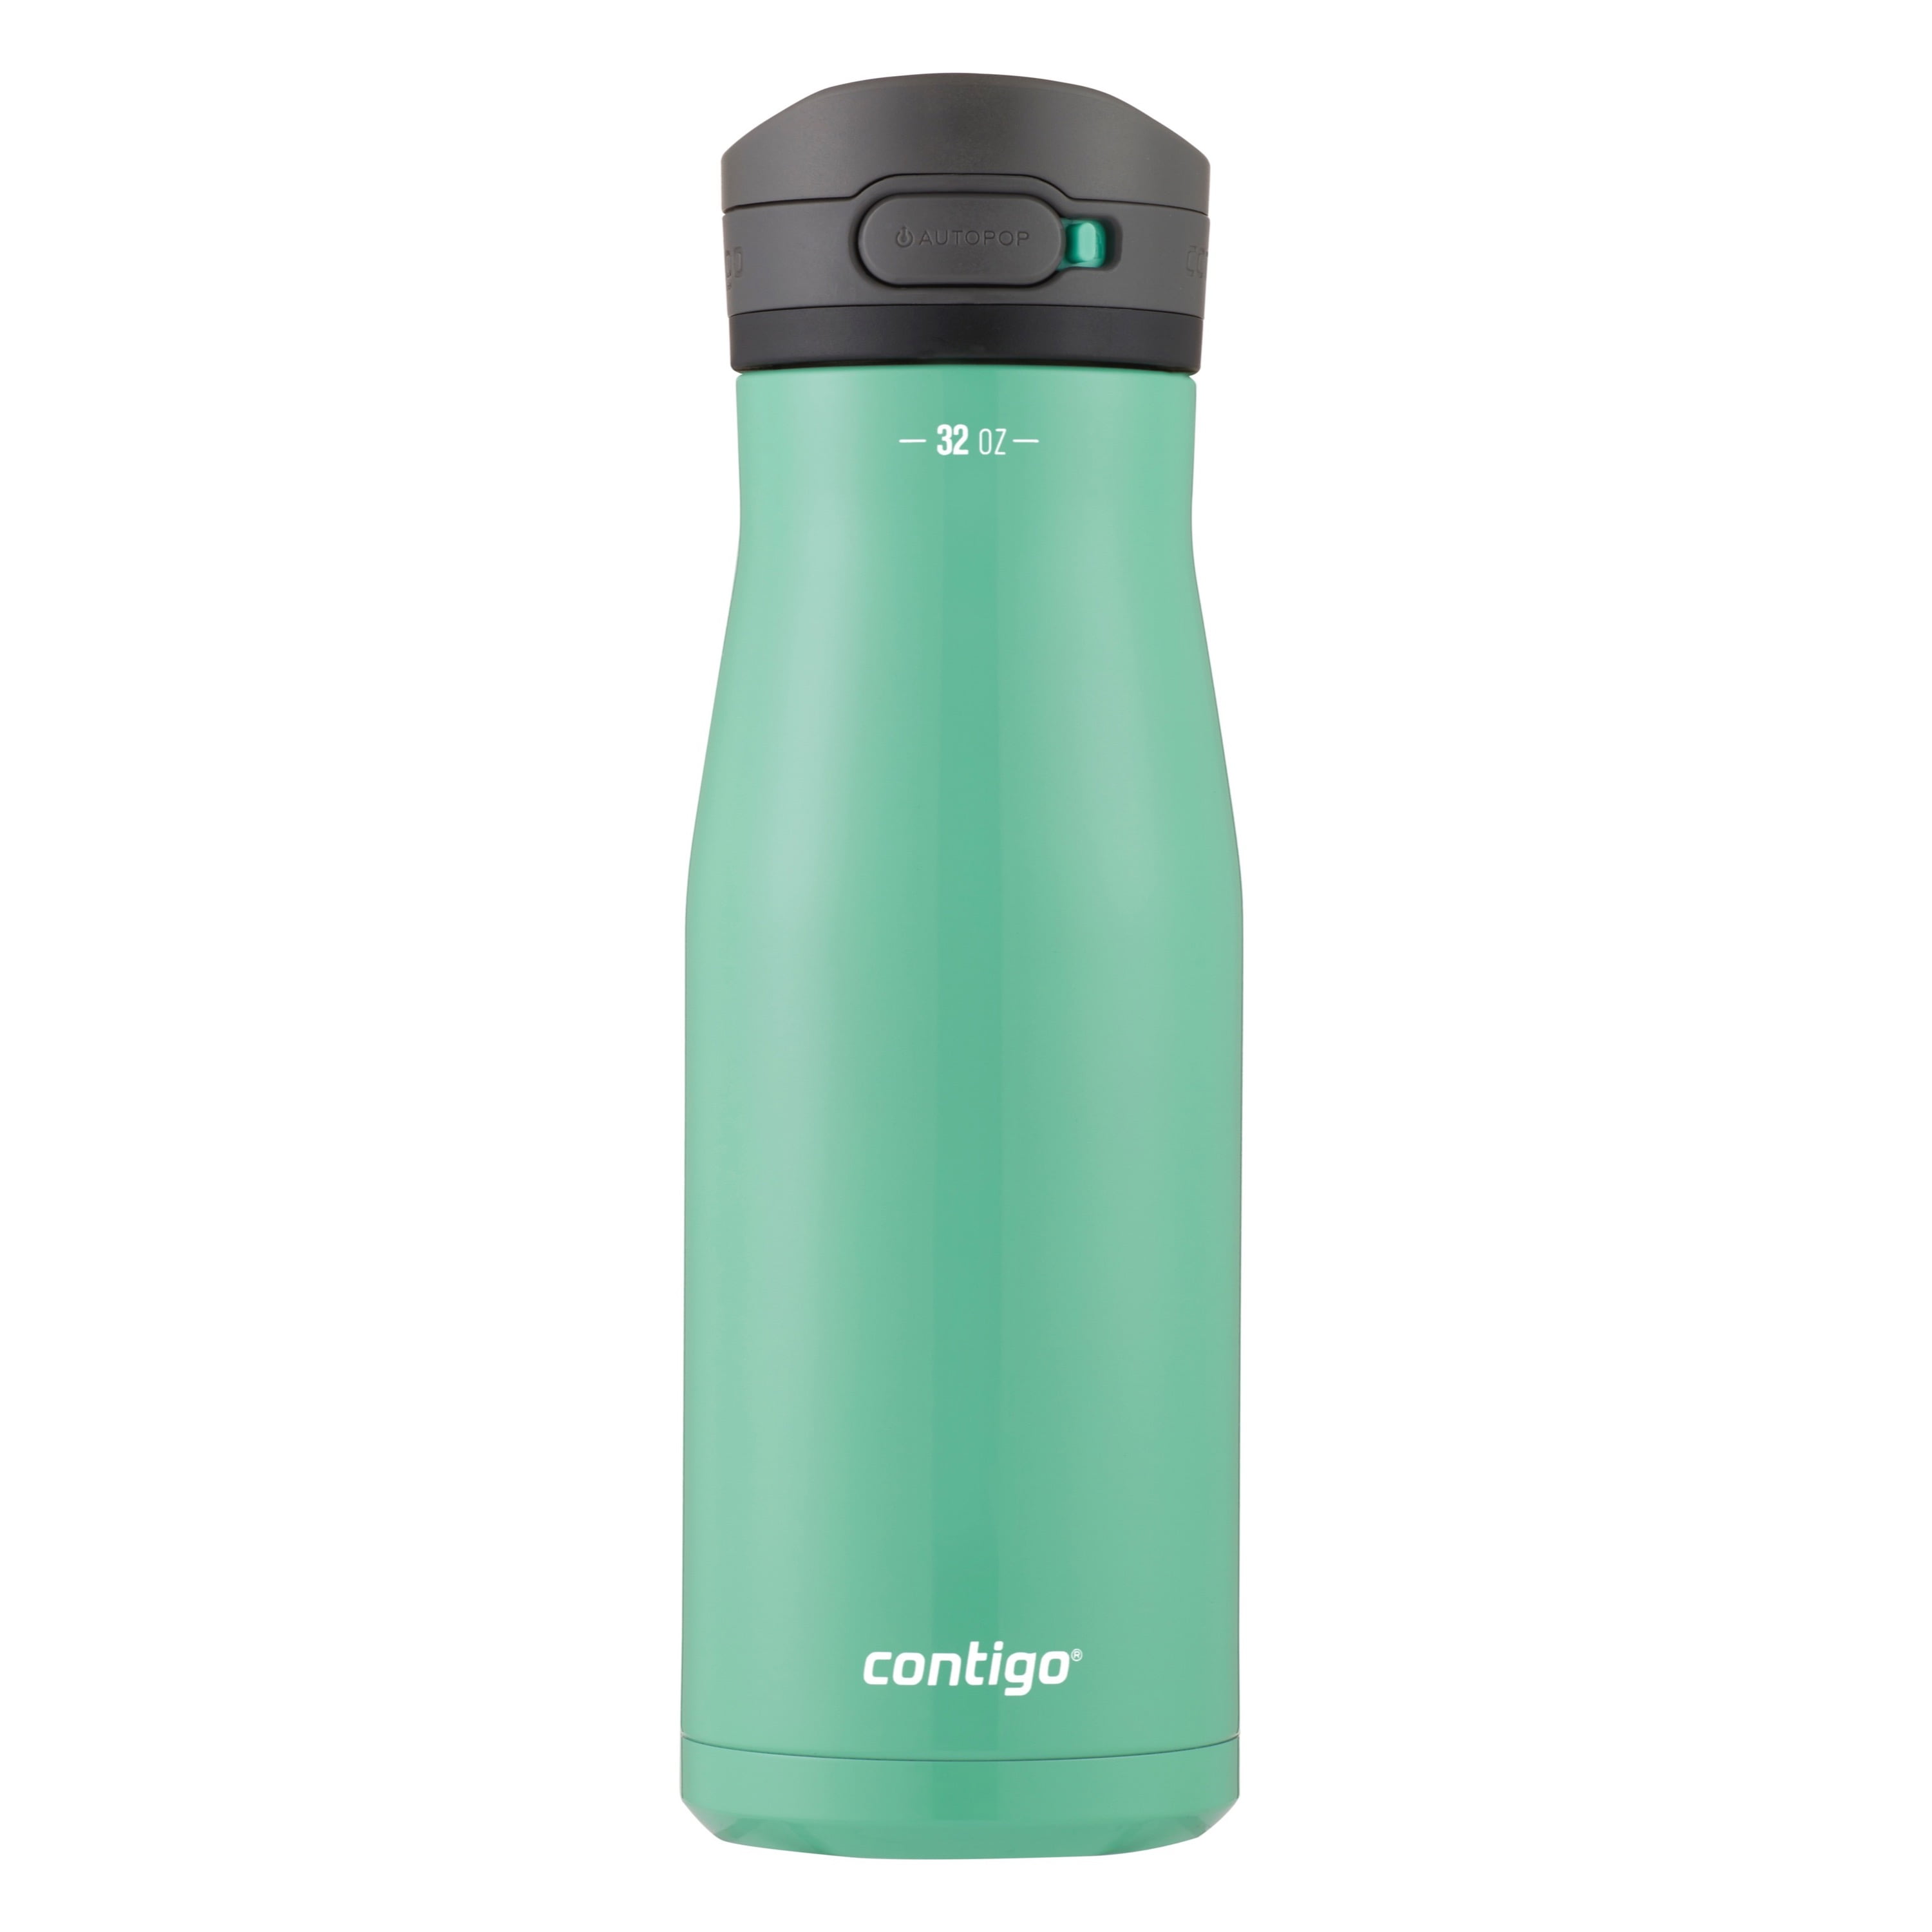 Jackson Chill Autopop Vacuum-Insulated Water Bottle 590 ml Blue Corn, Buy  Jackson Chill Autopop Vacuum-Insulated Water Bottle 590 ml Blue Corn here